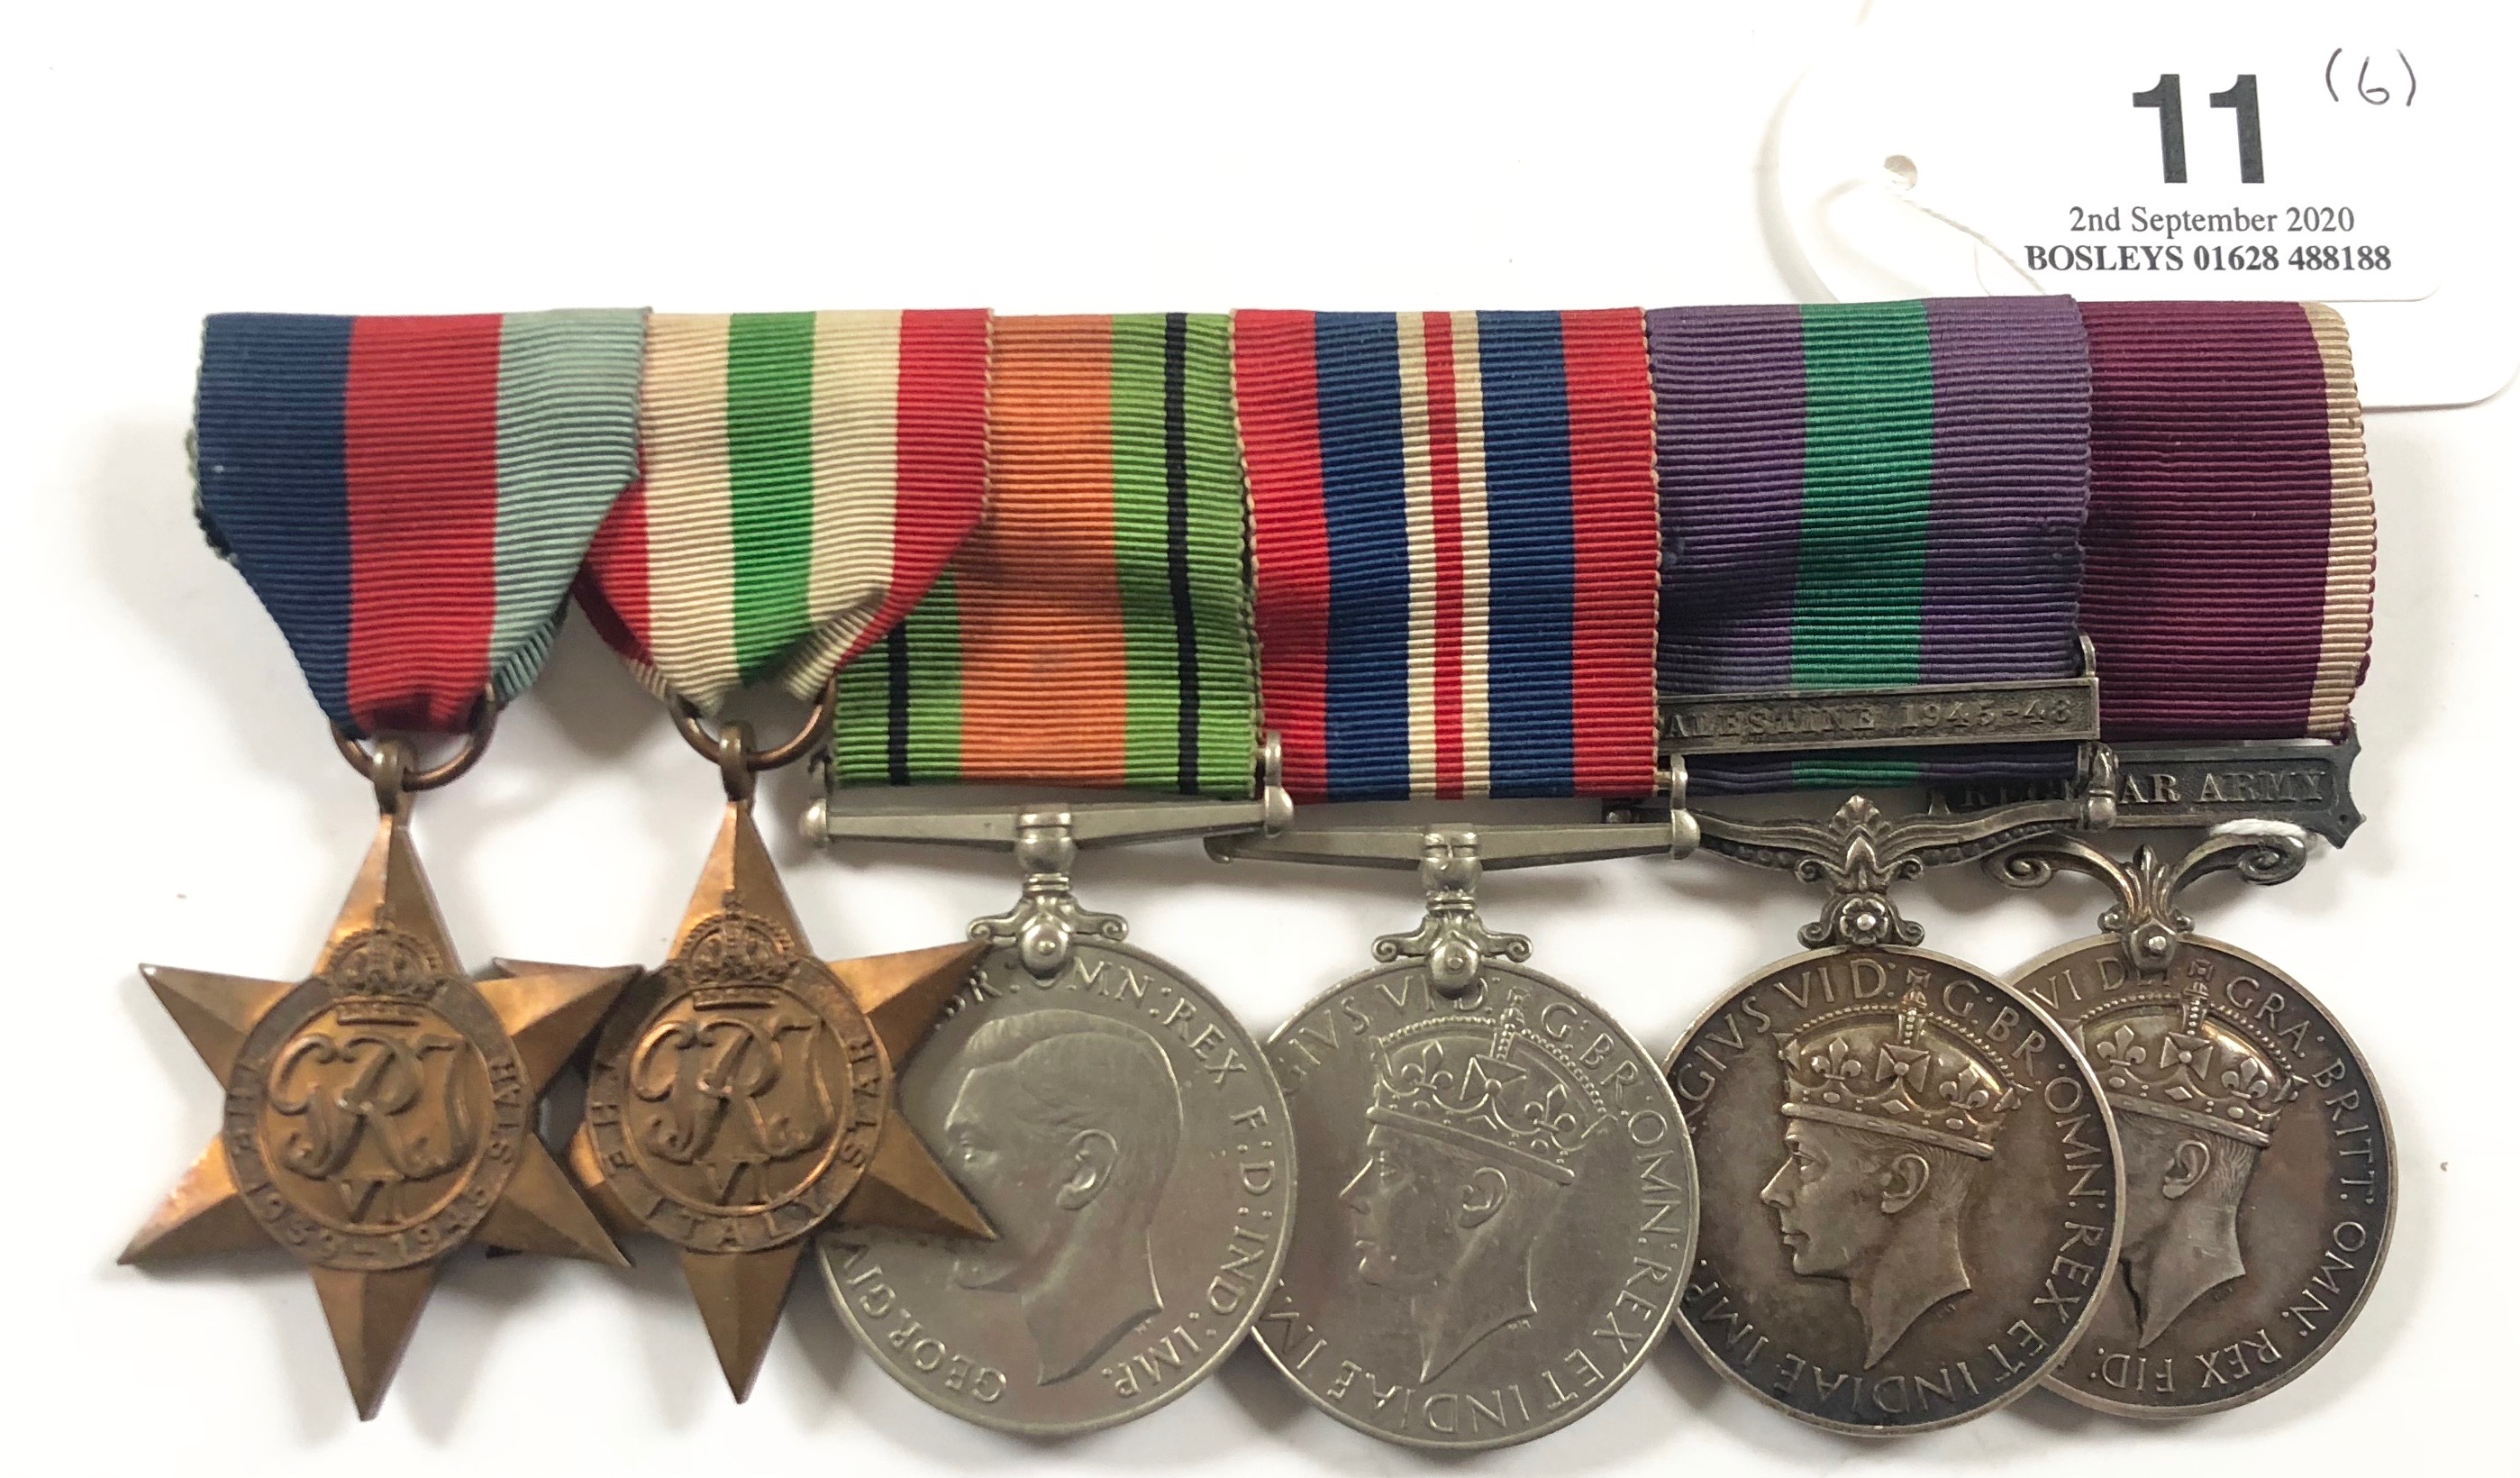 Royal Army Service Corps WW1 Long Service Medal Group of Six. Awarded to “S/5495179 L. CPL. E.